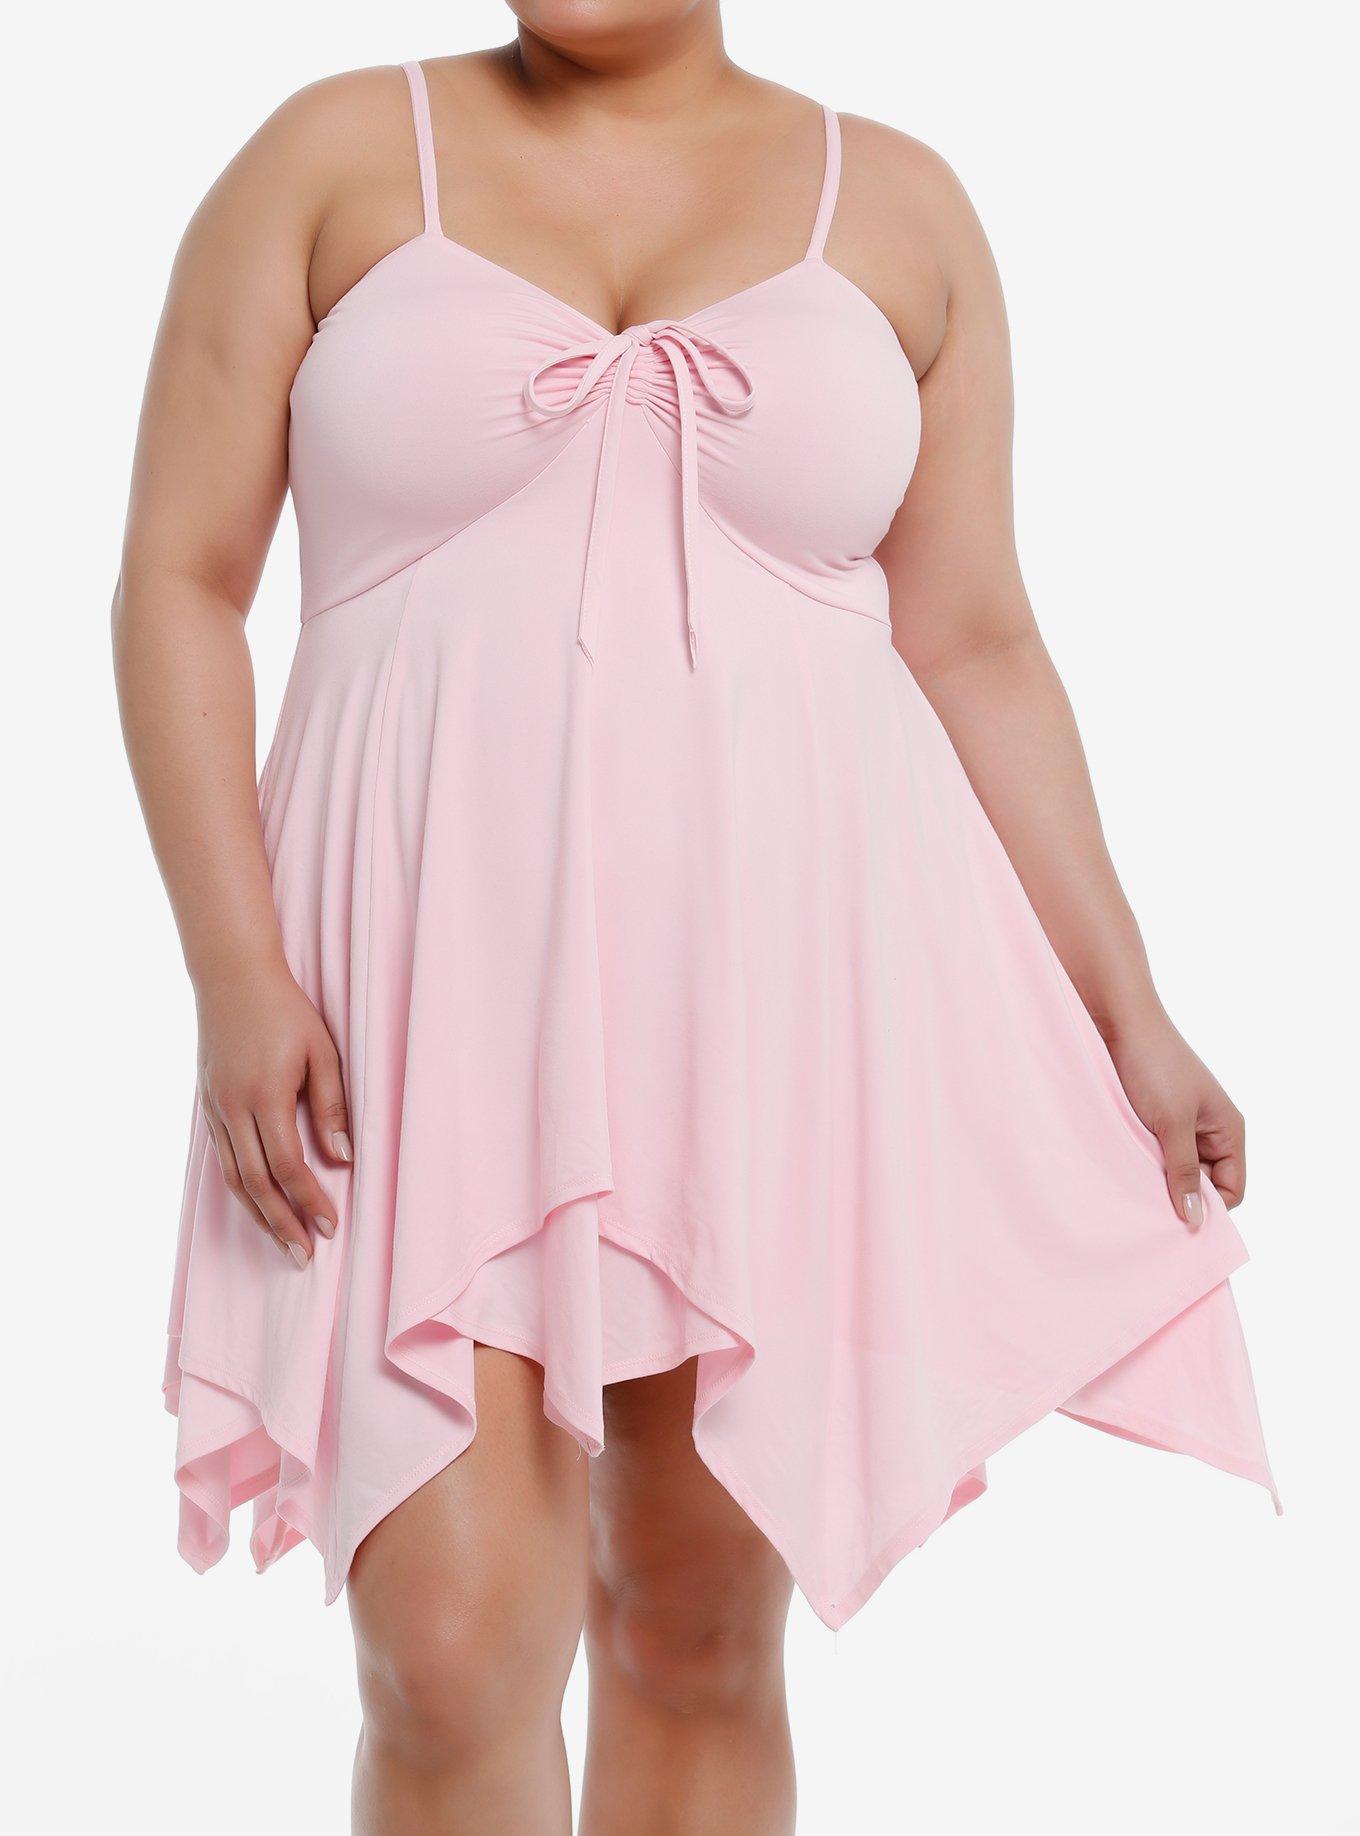 New PLUS SIZE Womens BUTTERY SOFT PINK BABYDOLL TANK TOP TUNIC